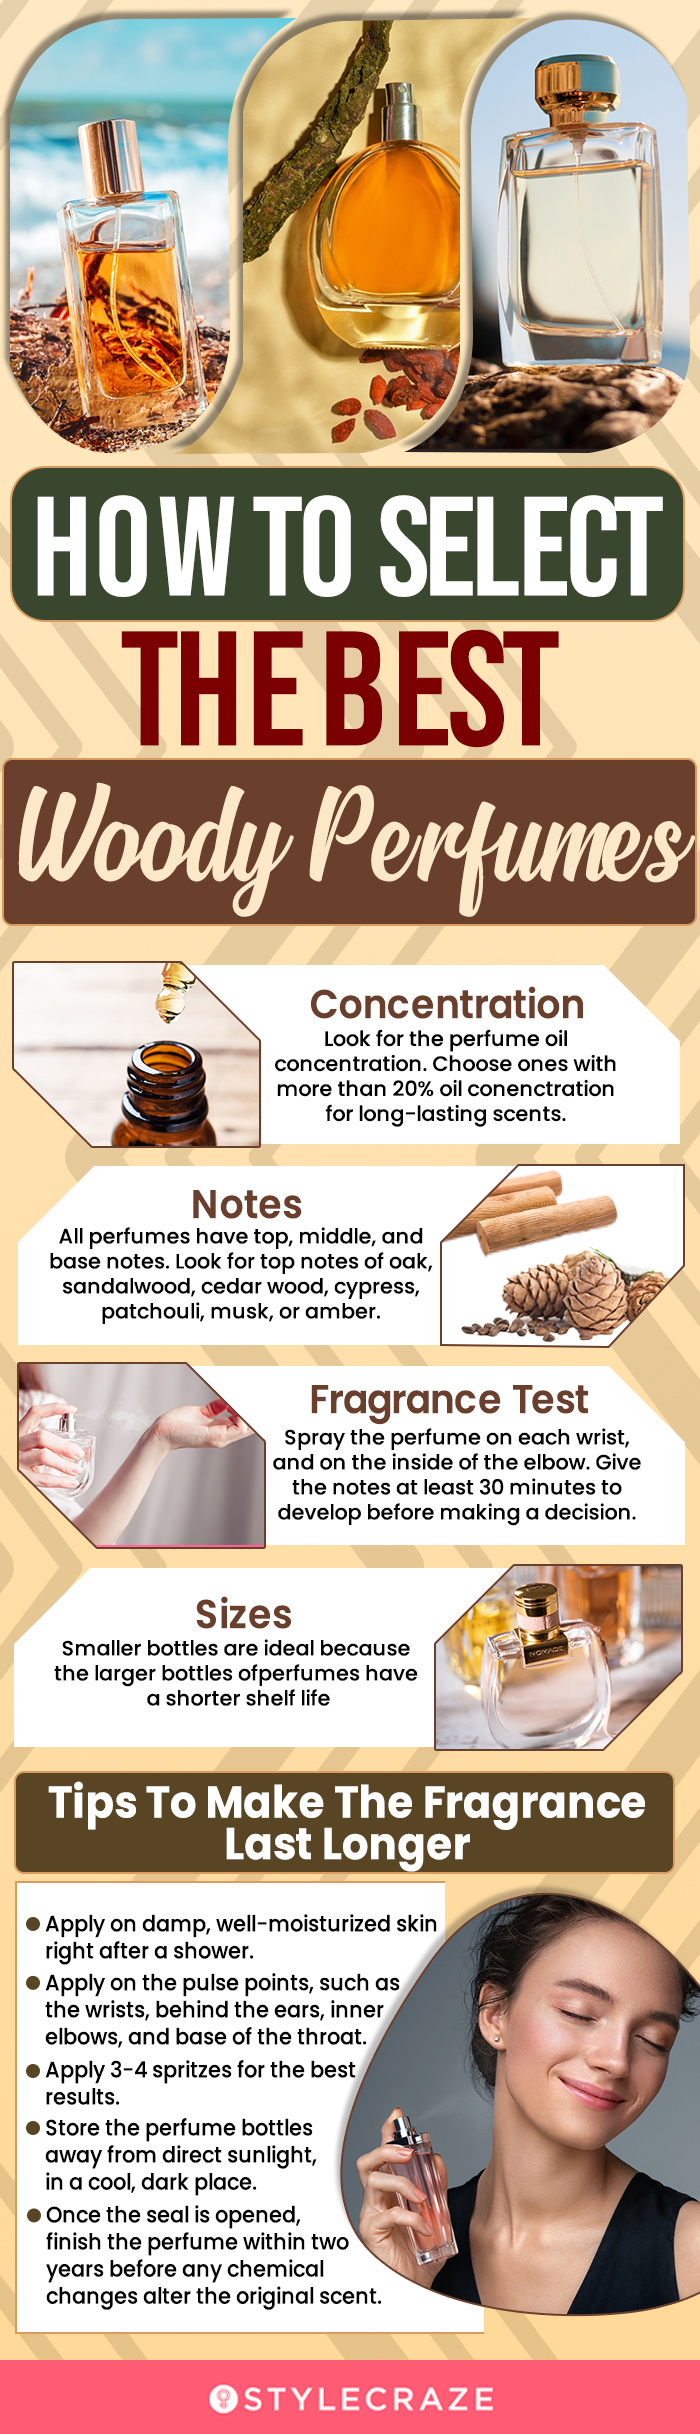 How To Select The Best Woody Perfumes [infographic]